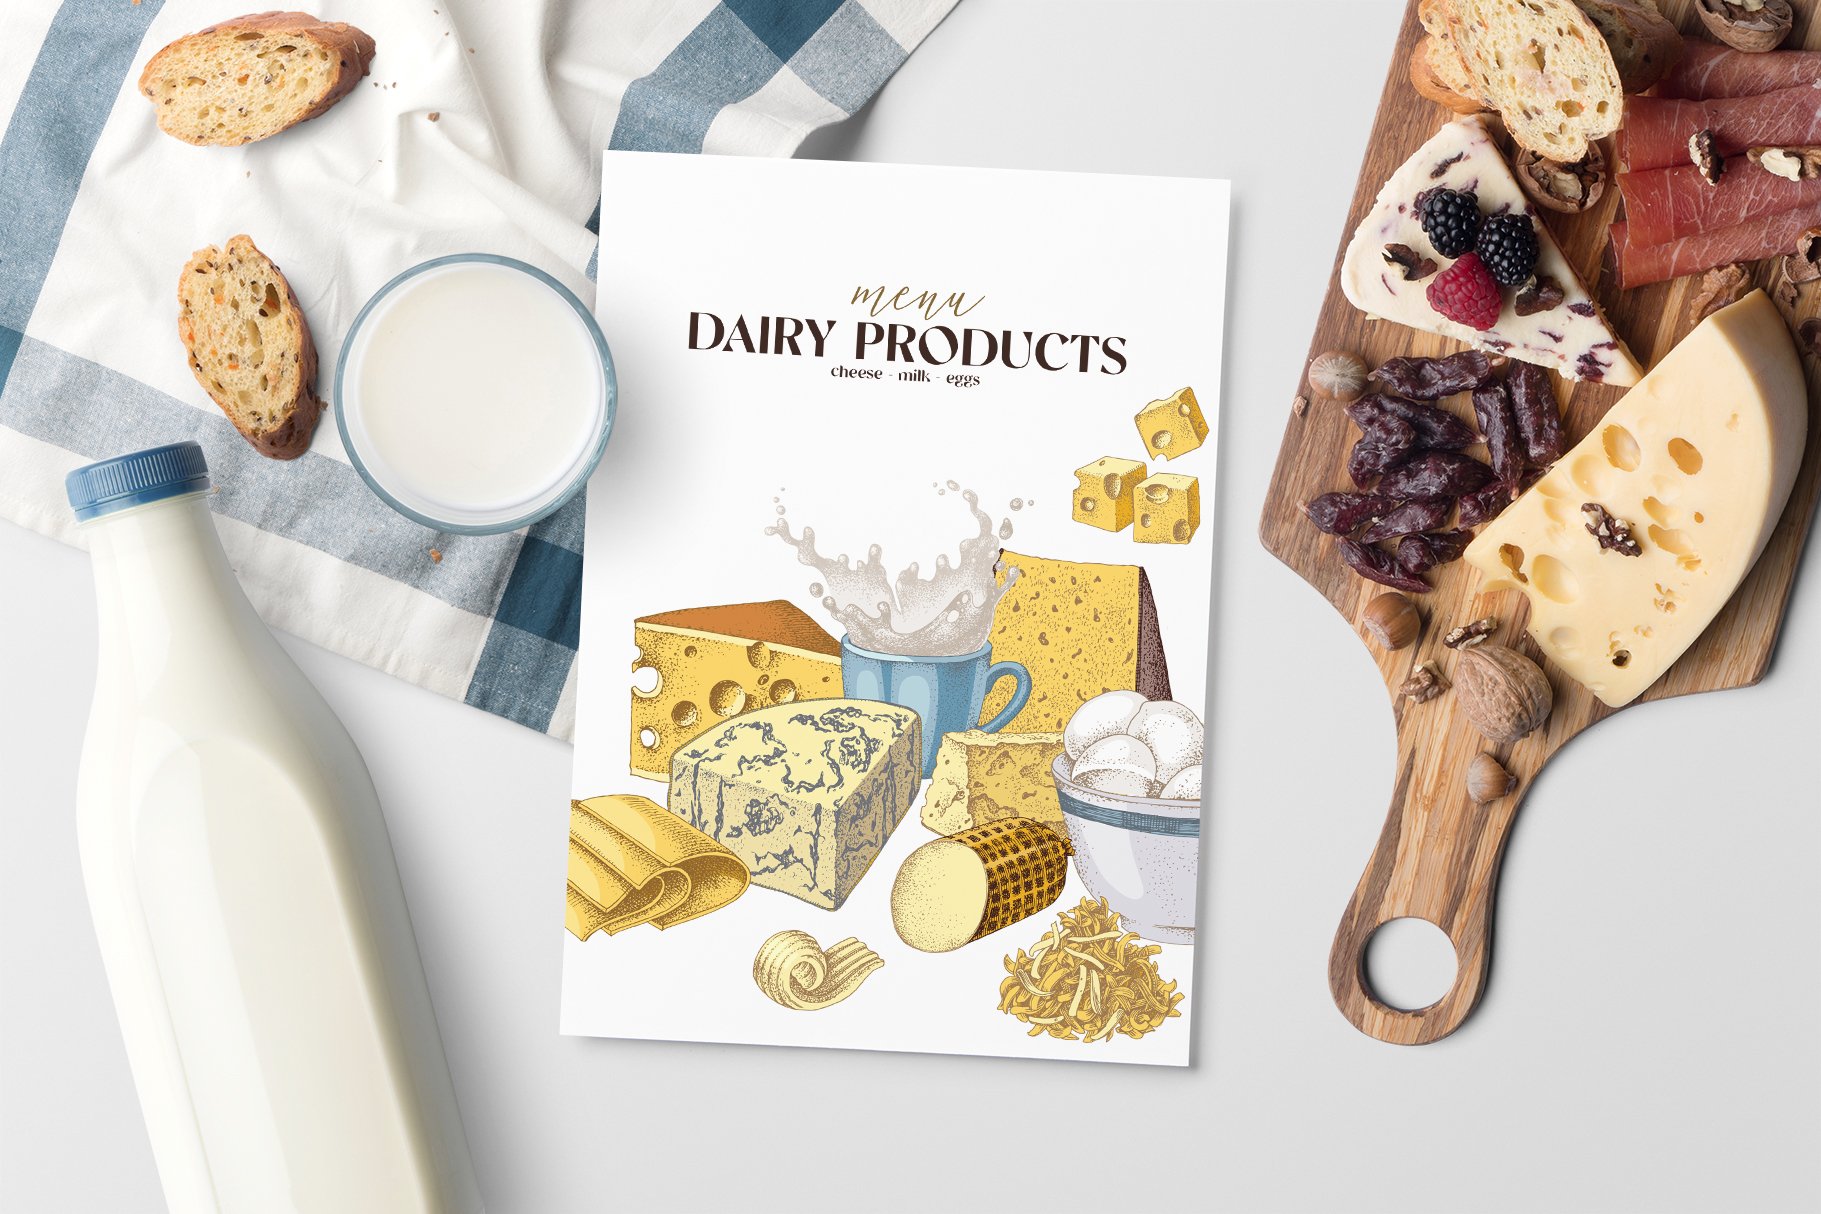 Create menu with dairy products.